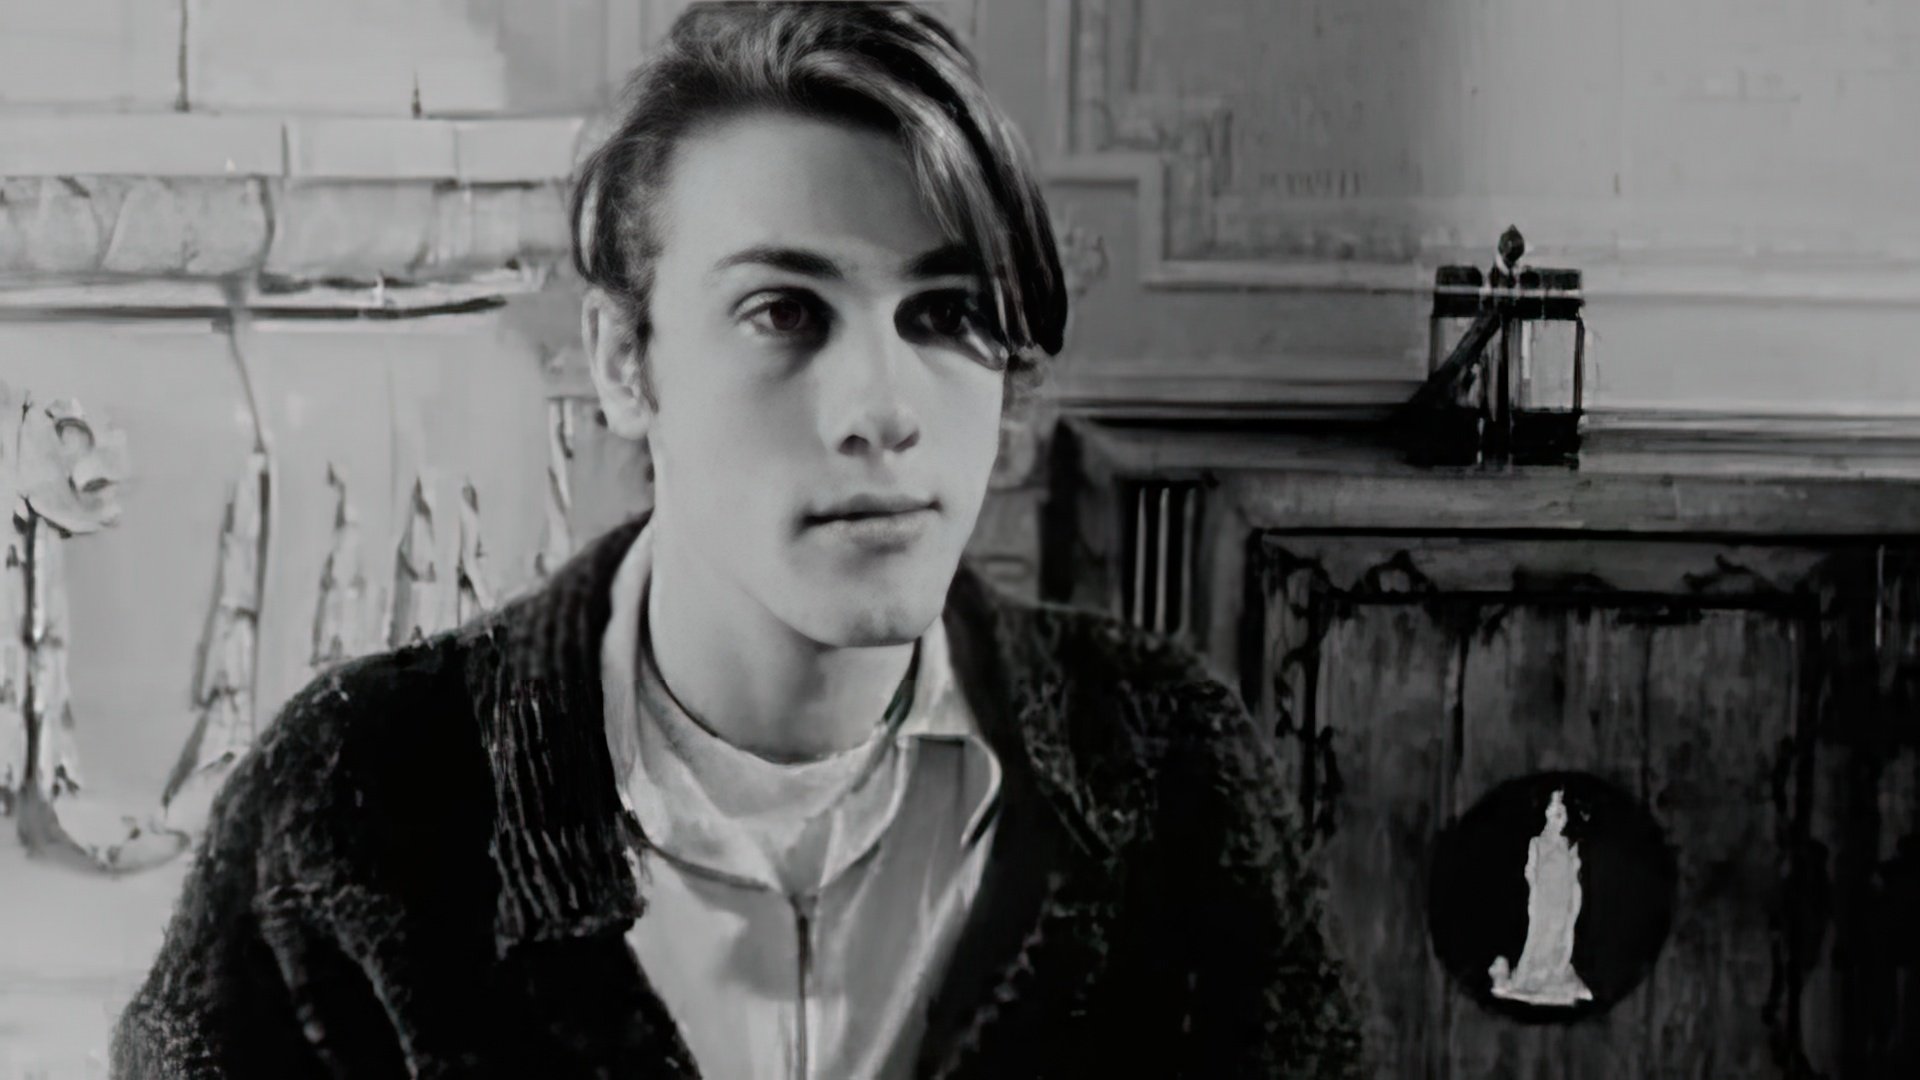 Christoph Waltz in youth